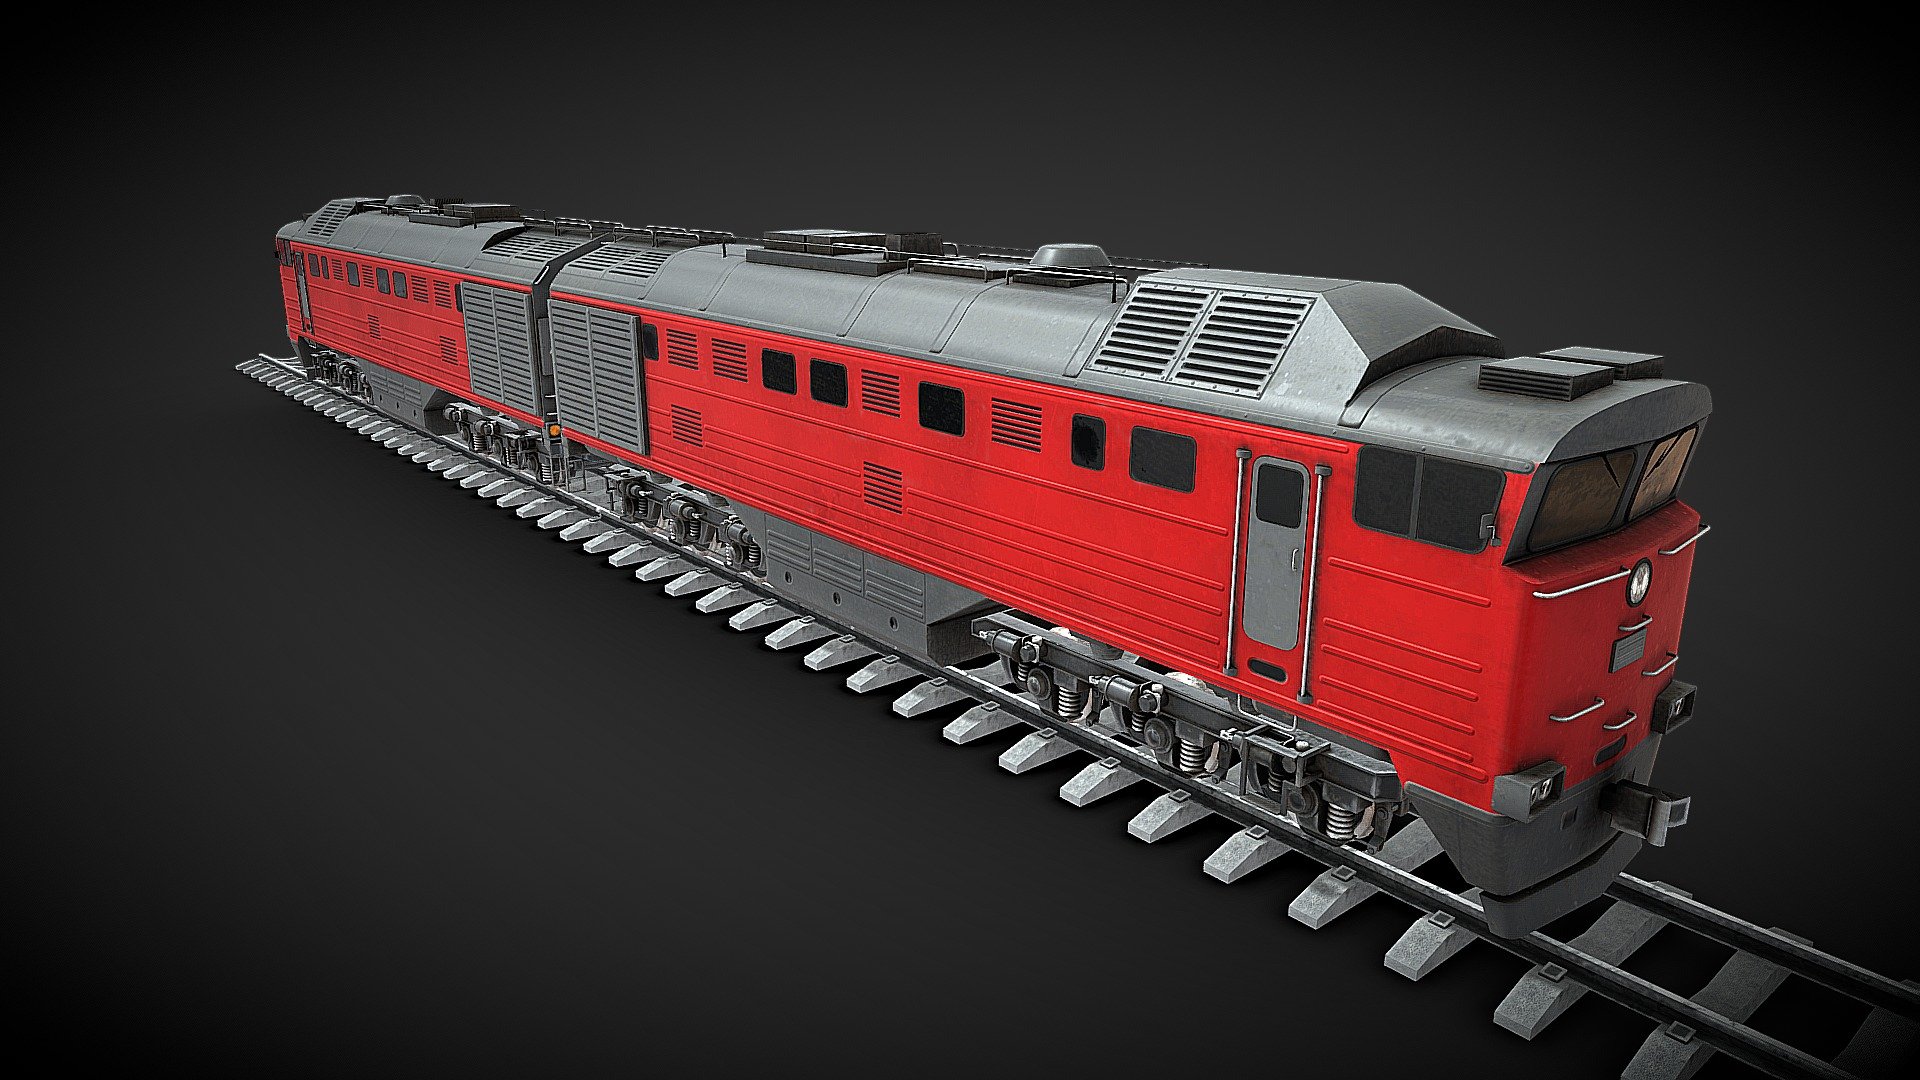 Russian train 3D model. Unity engine scale model.Can be use for train physics in Unity. Separate wheels, bogies, body and wipers 3d model